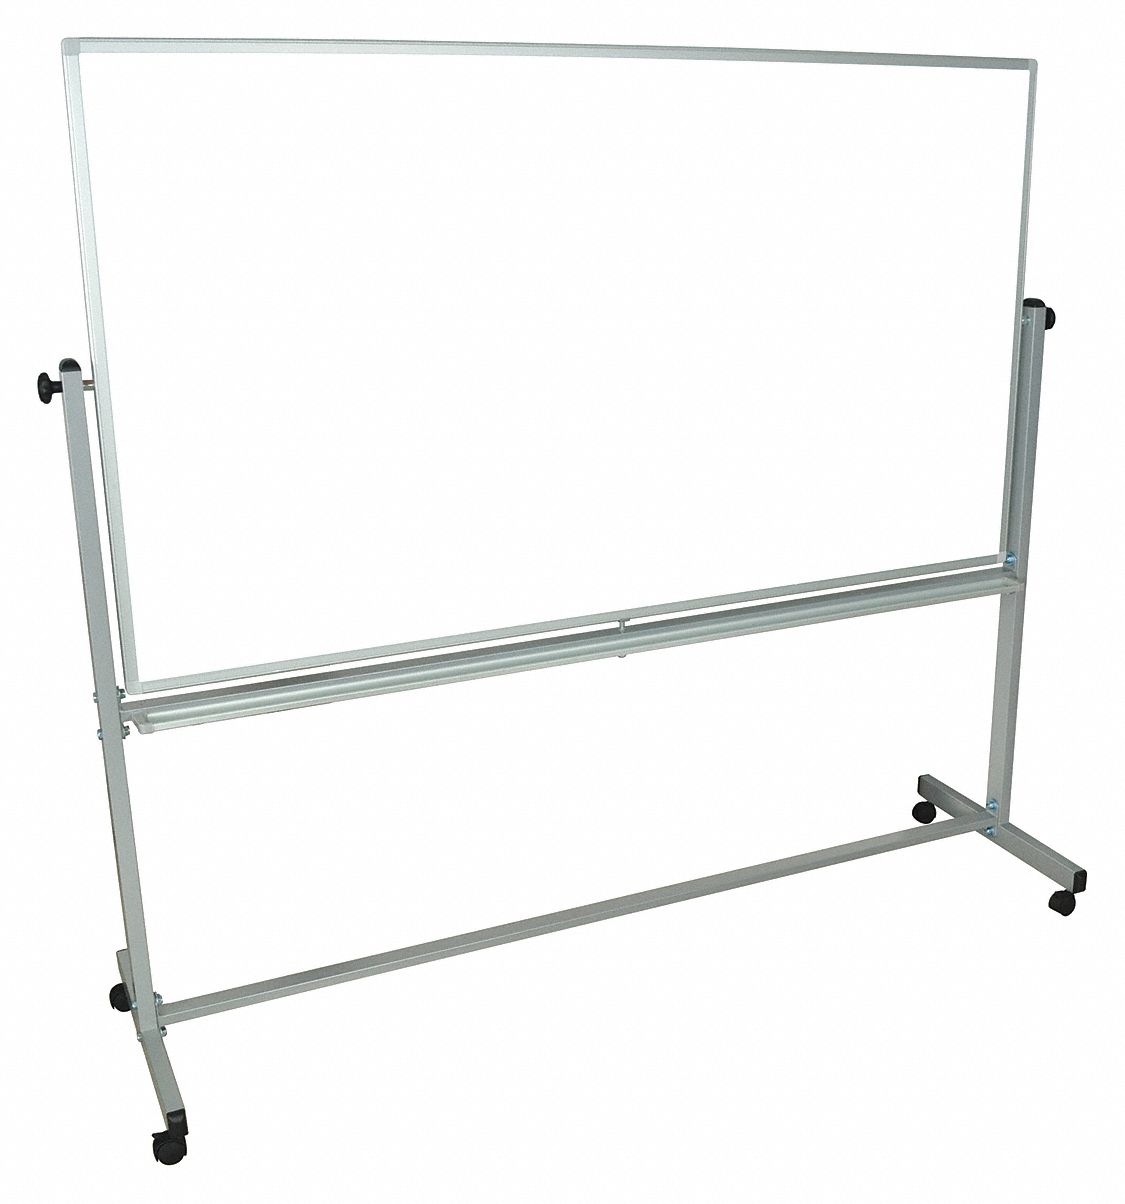 Dry Erase Board: Mobile/Casters, 40 in Dry Erase Ht, 72 in Dry Erase Wd, 23 in Dp, Silver, White